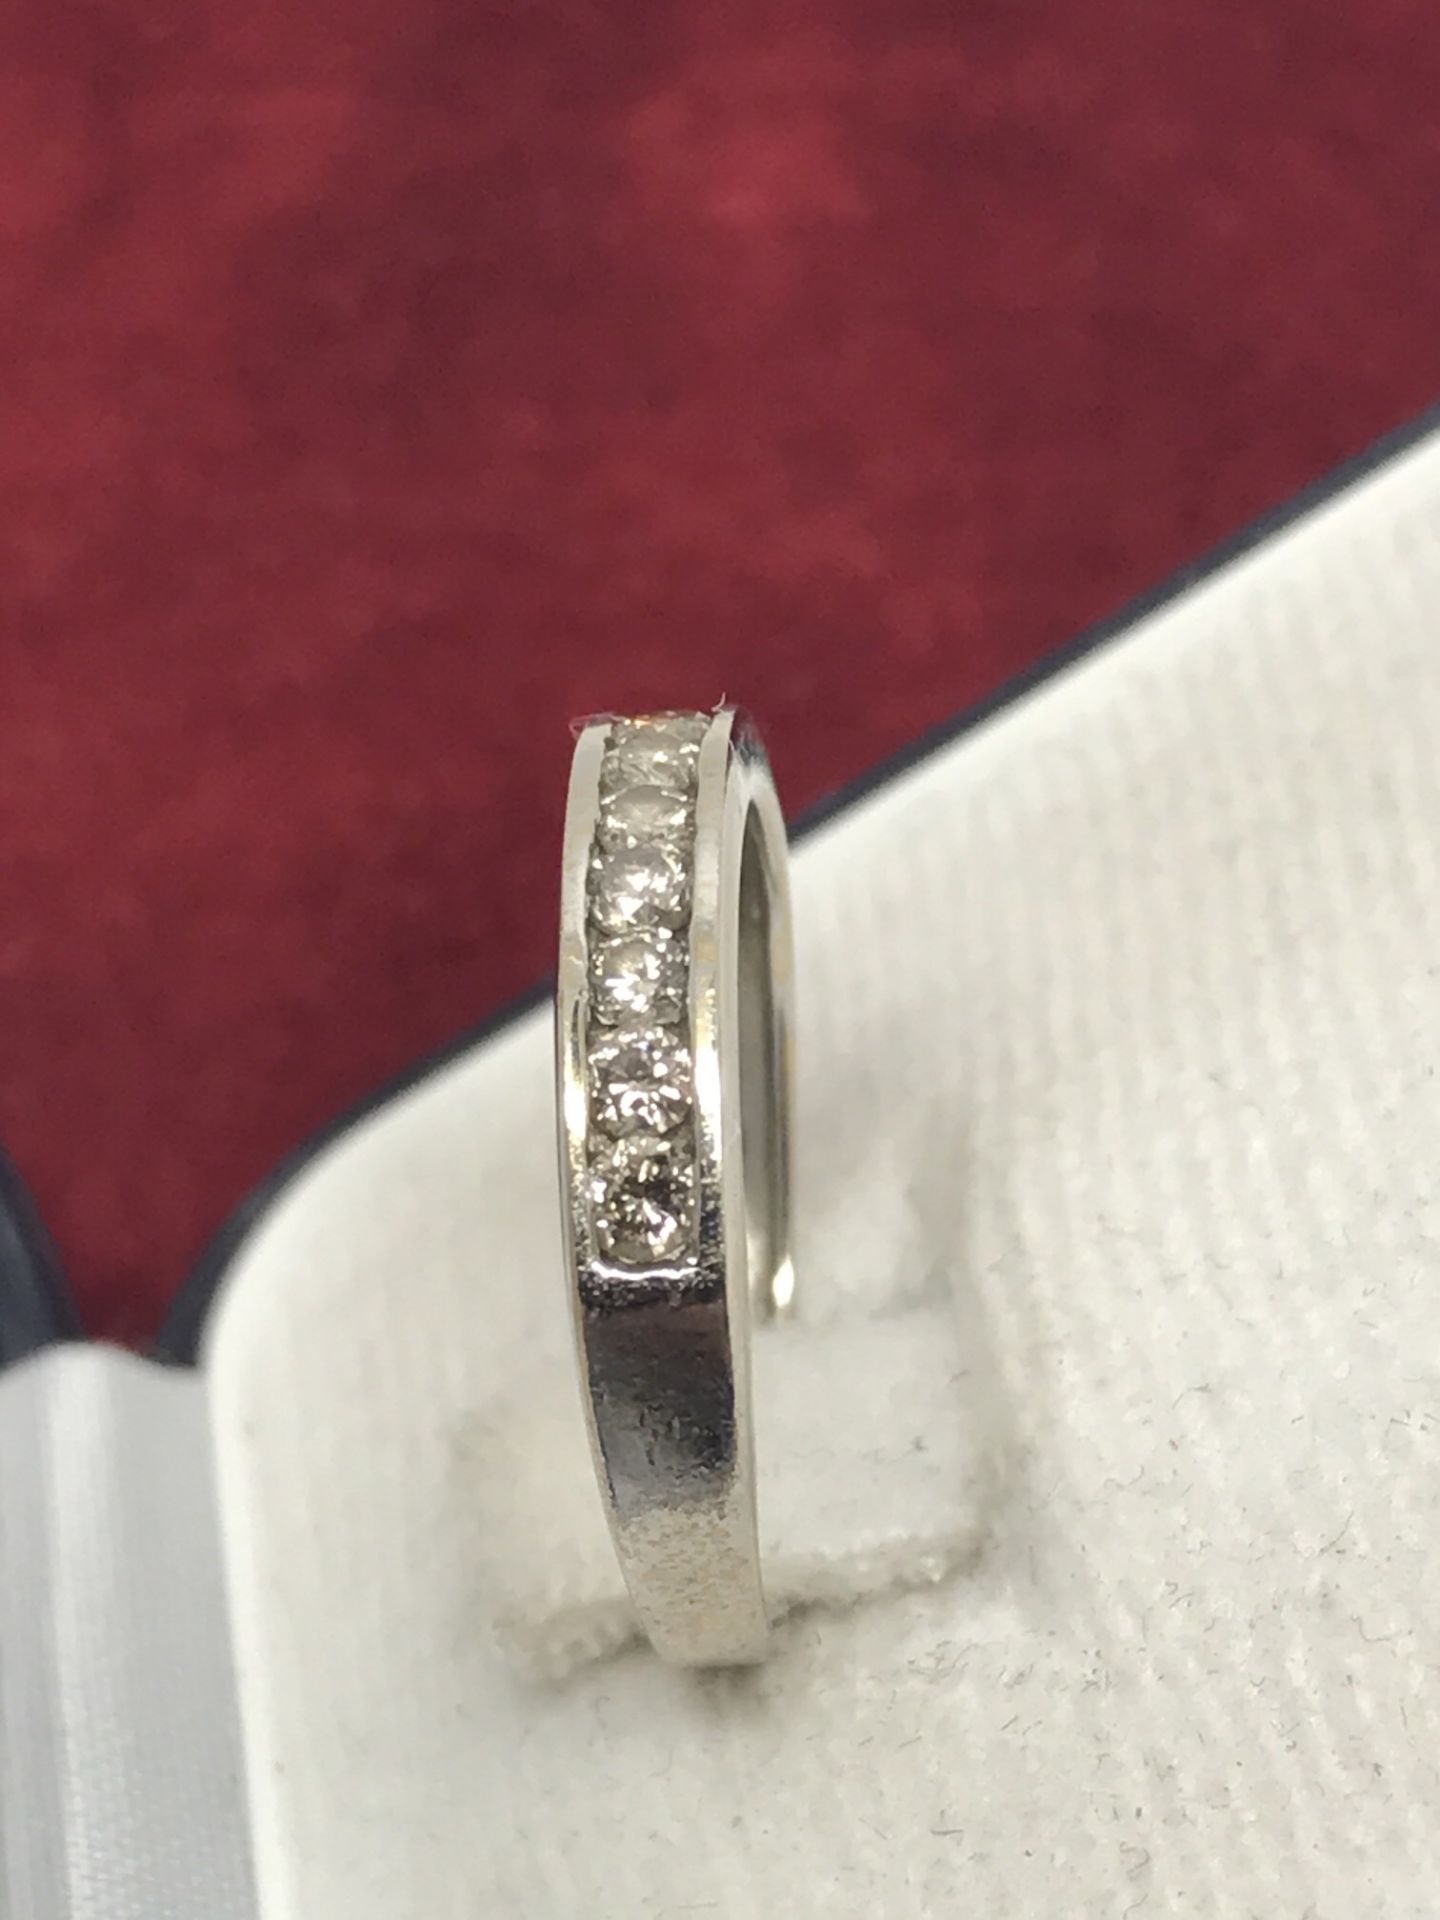 9ct GOLD CHANNEL SET DIAMOND 1/2 ETERNITY RING - Image 3 of 3